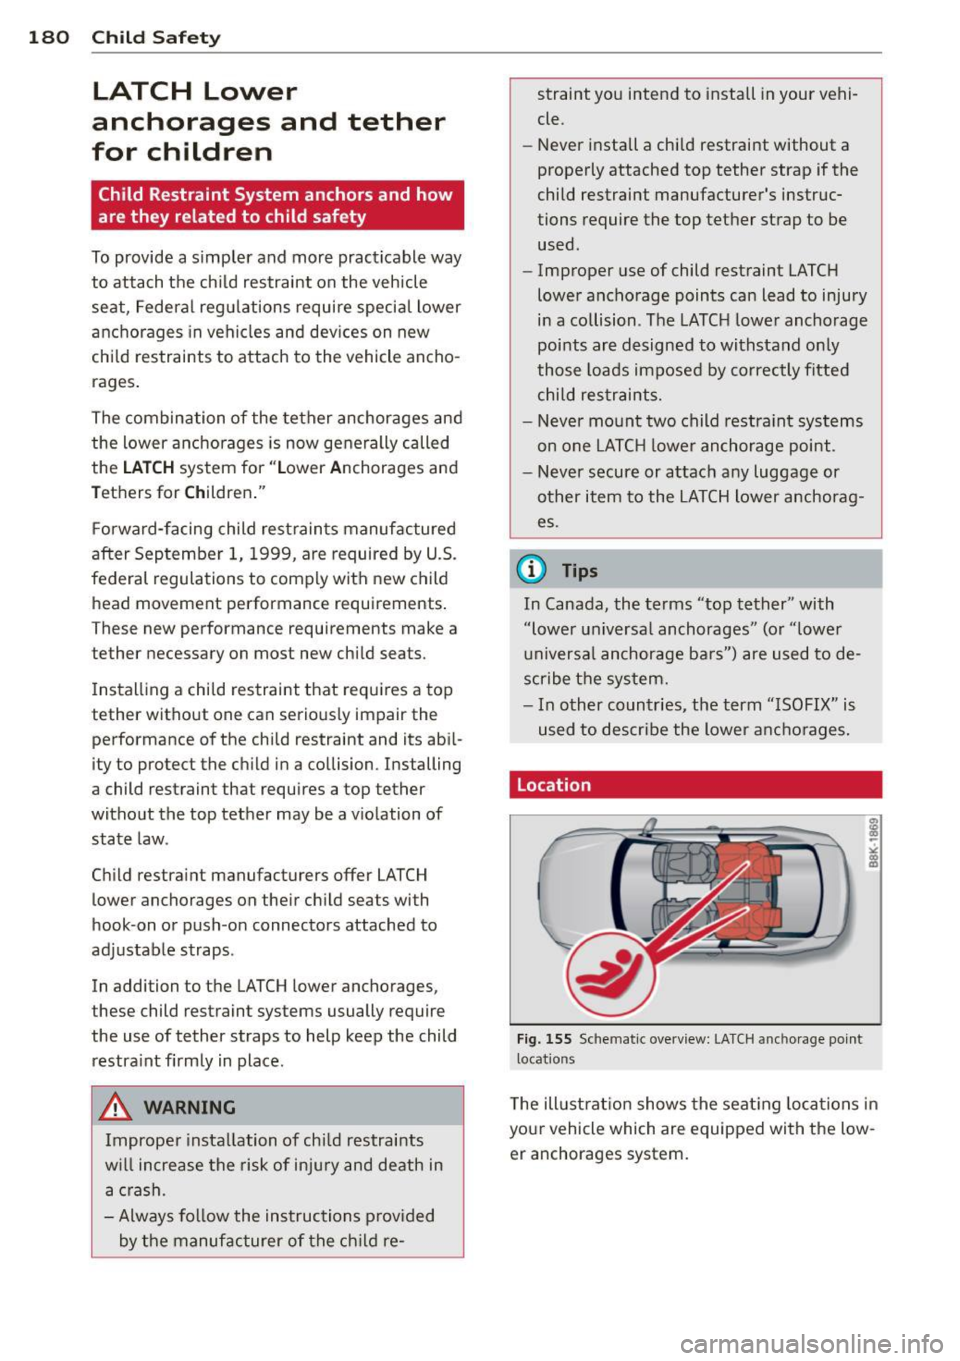 AUDI A5 COUPE 2013  Owners Manual 180  Child  Safet y 
LATCH  Lower 
anchorages  and  tether 
for  children 
Child  Restraint  System  anchors  and  how 
are they  related  to  child  safety 
To provide  a  simpler and  more  practica